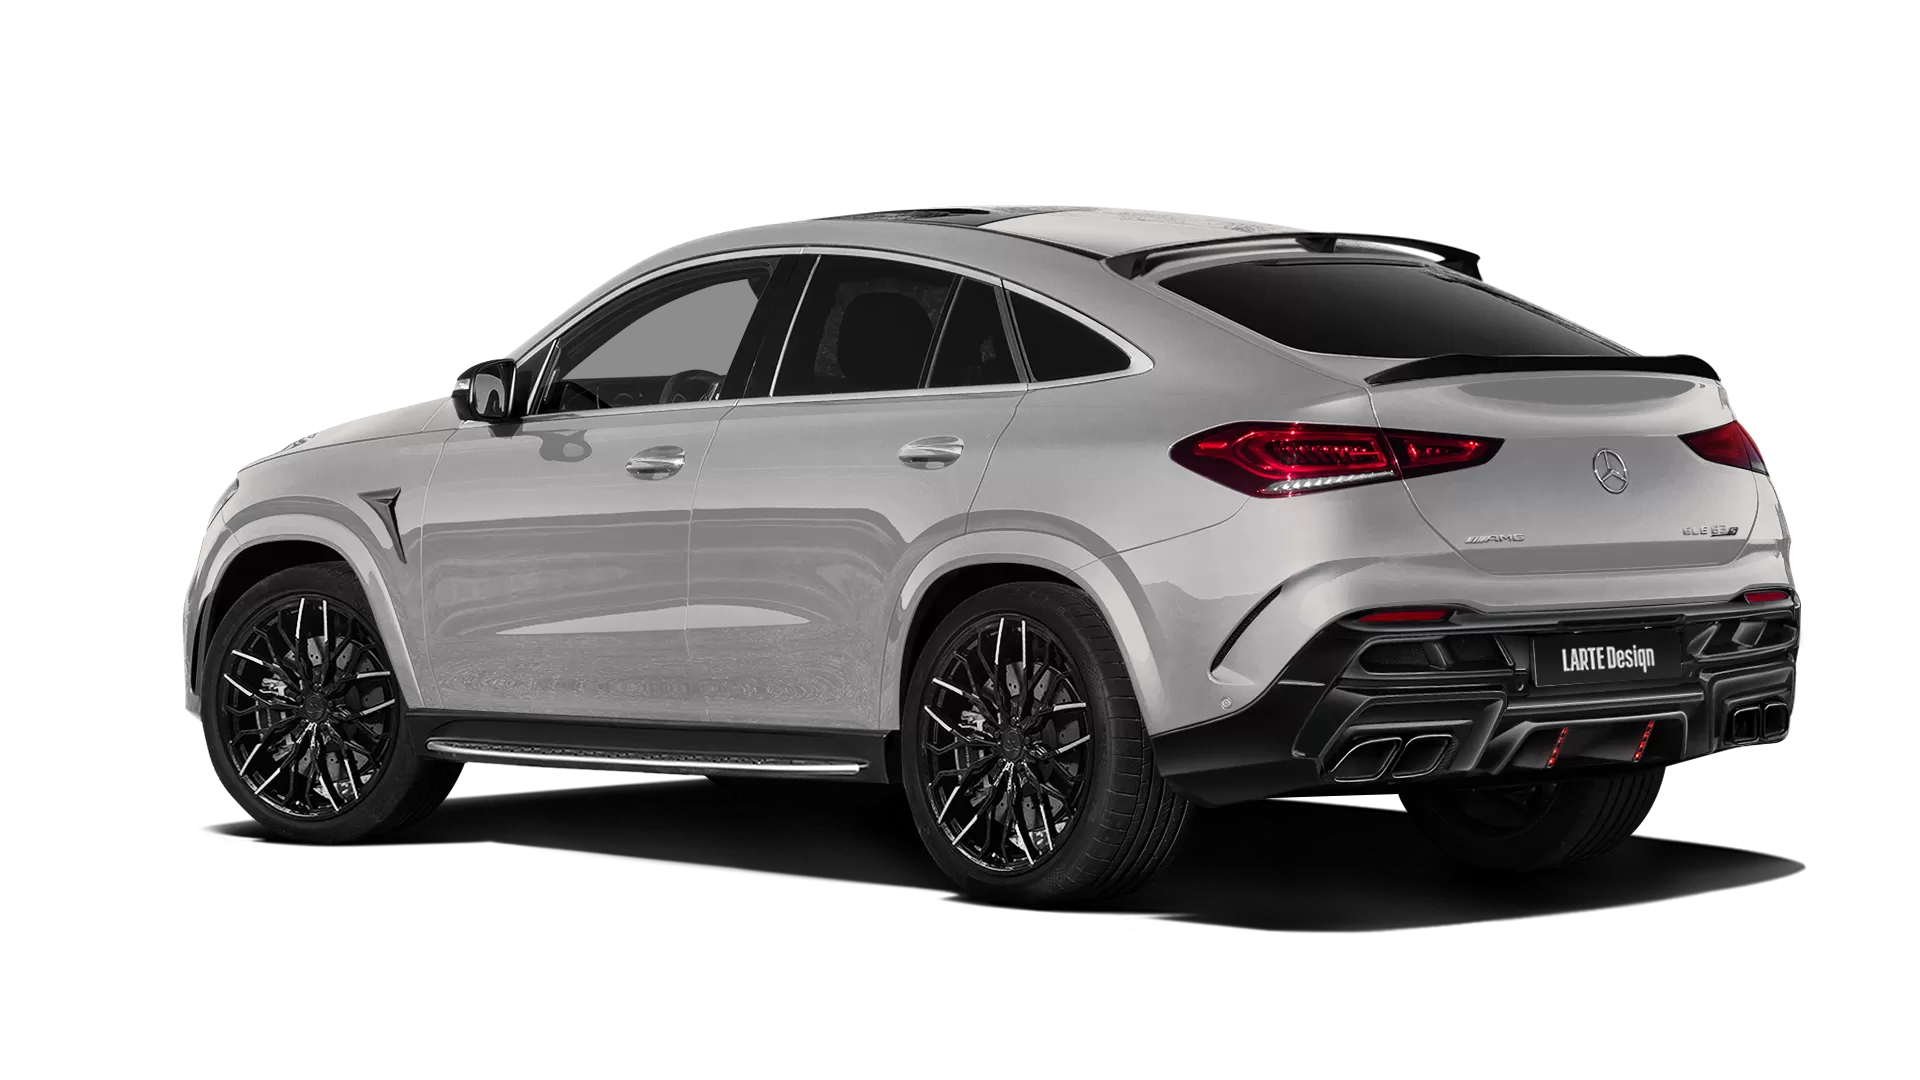 Mercedes GLE Coupe AMG 63 C167 with painted body kit: rear view shown in Mojave Silver